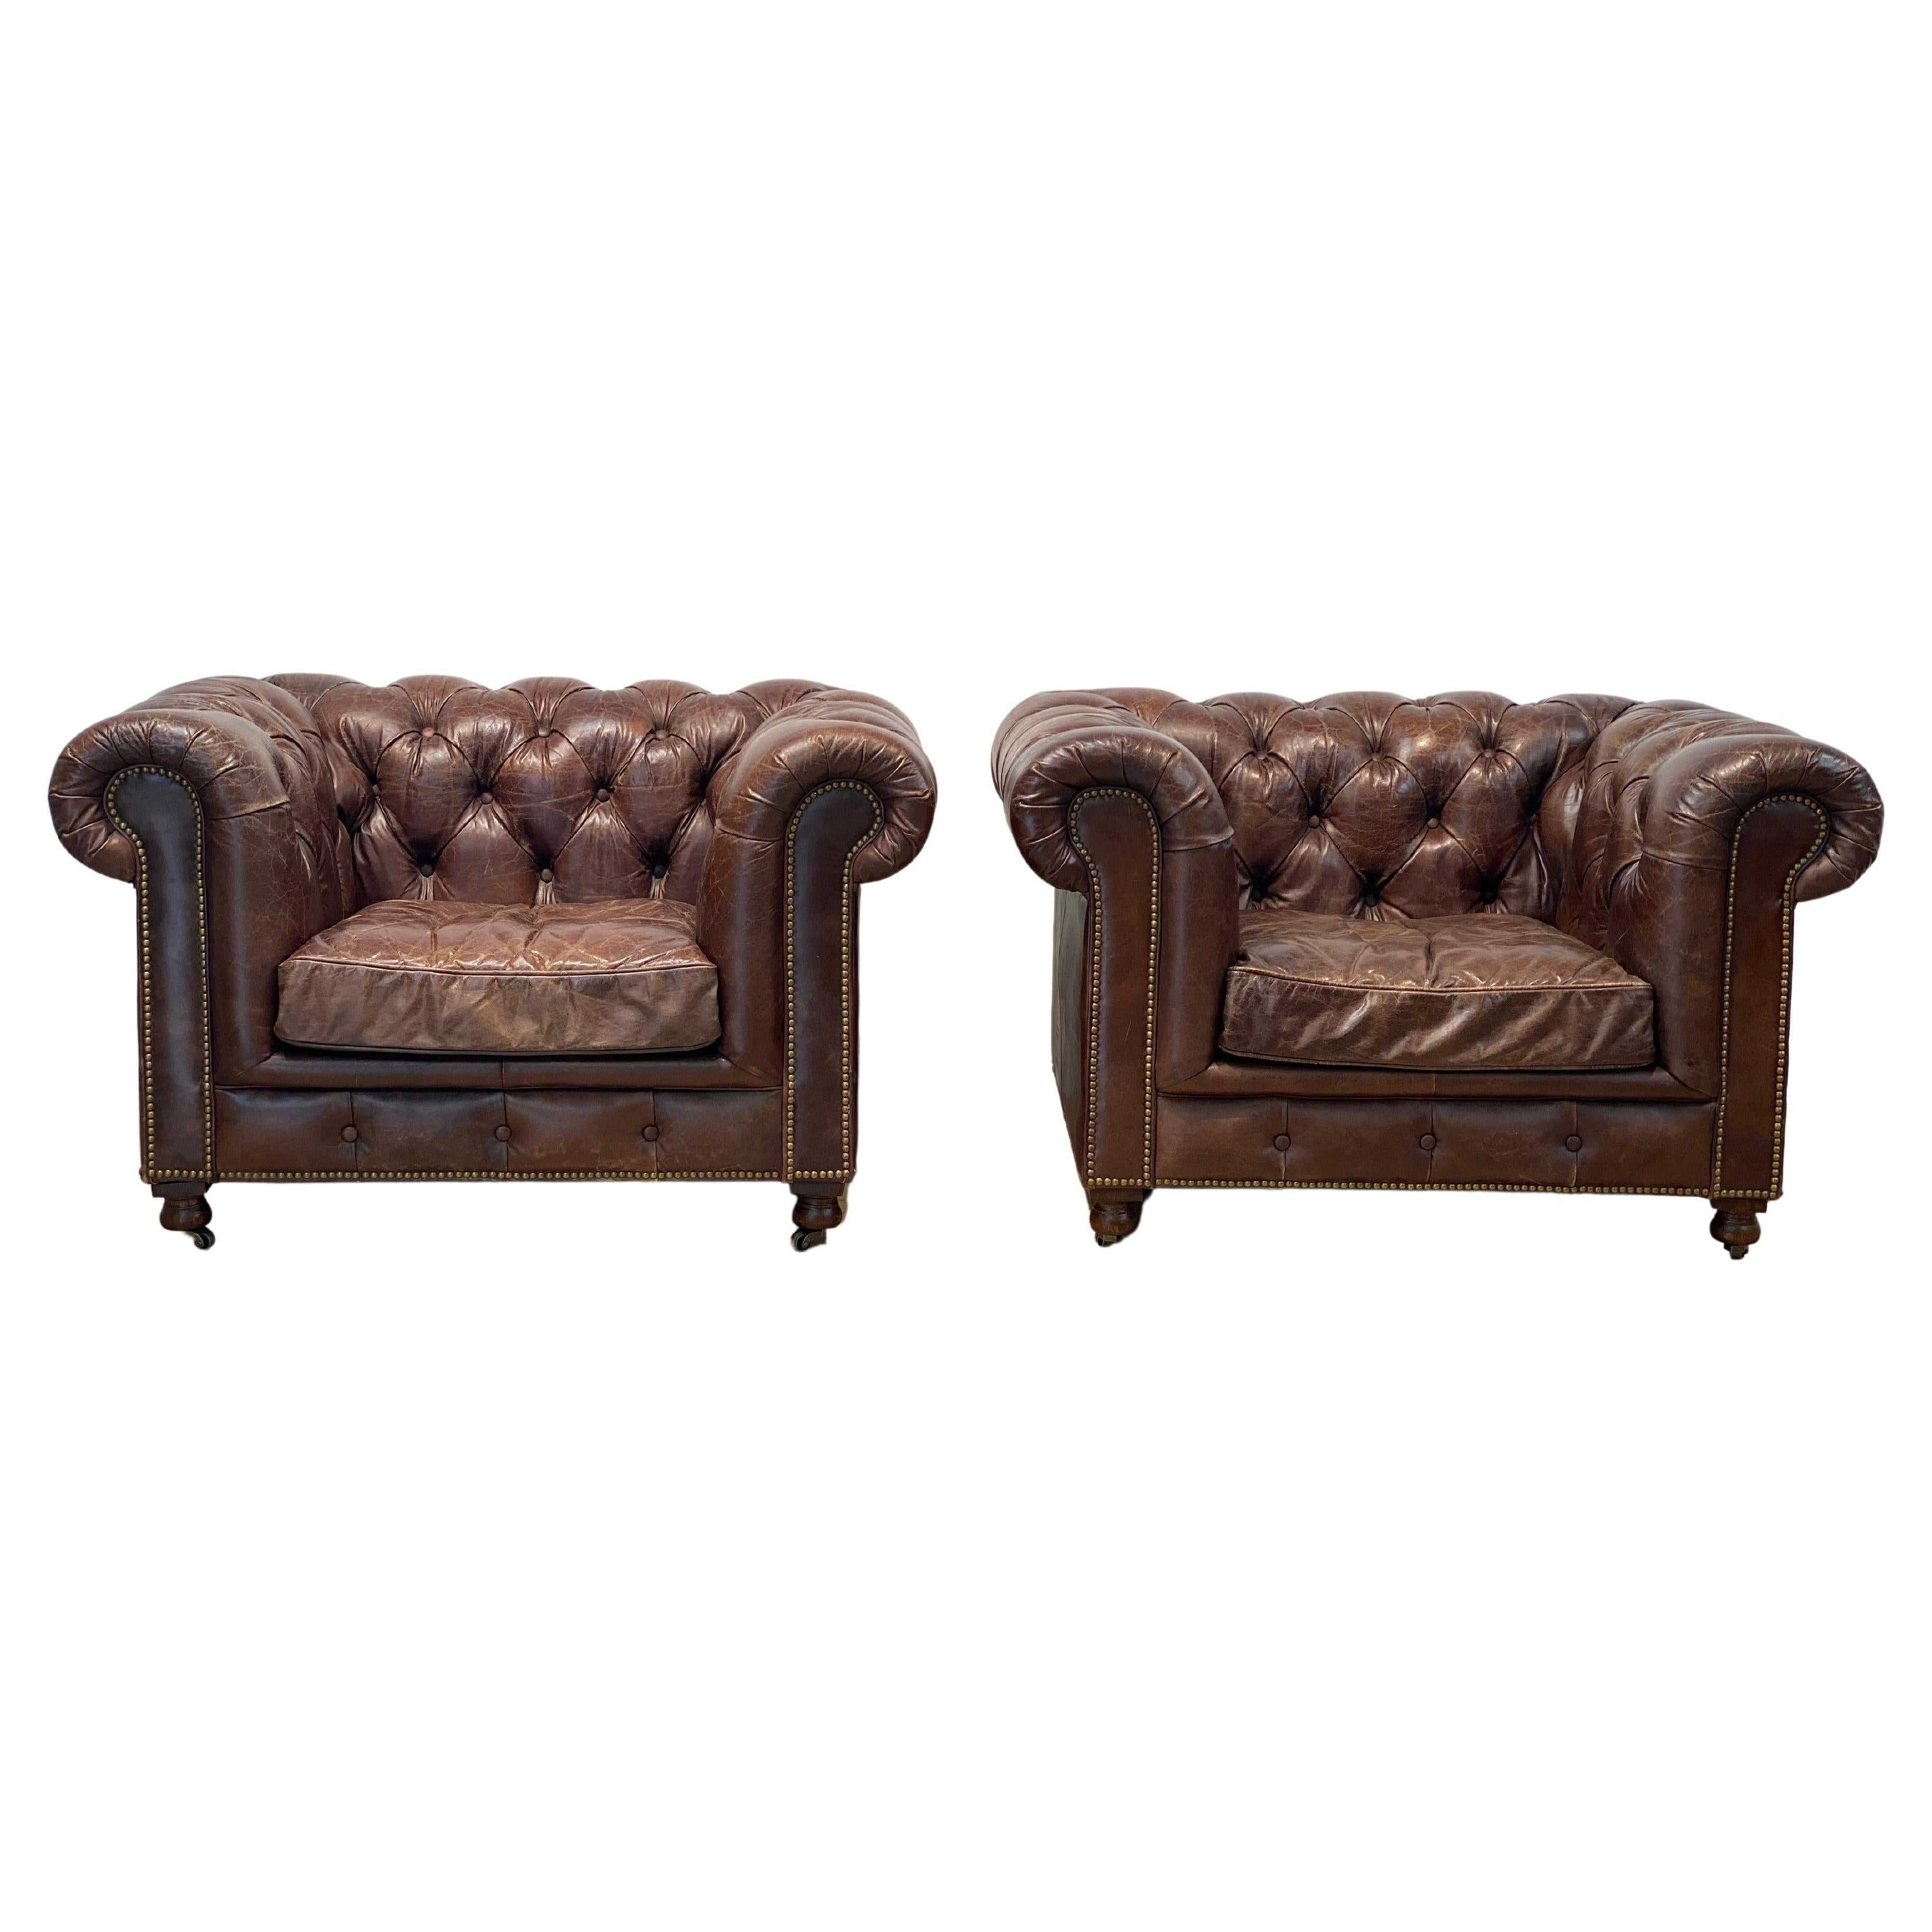 Pair of Leather Chesterfield Chairs For Sale